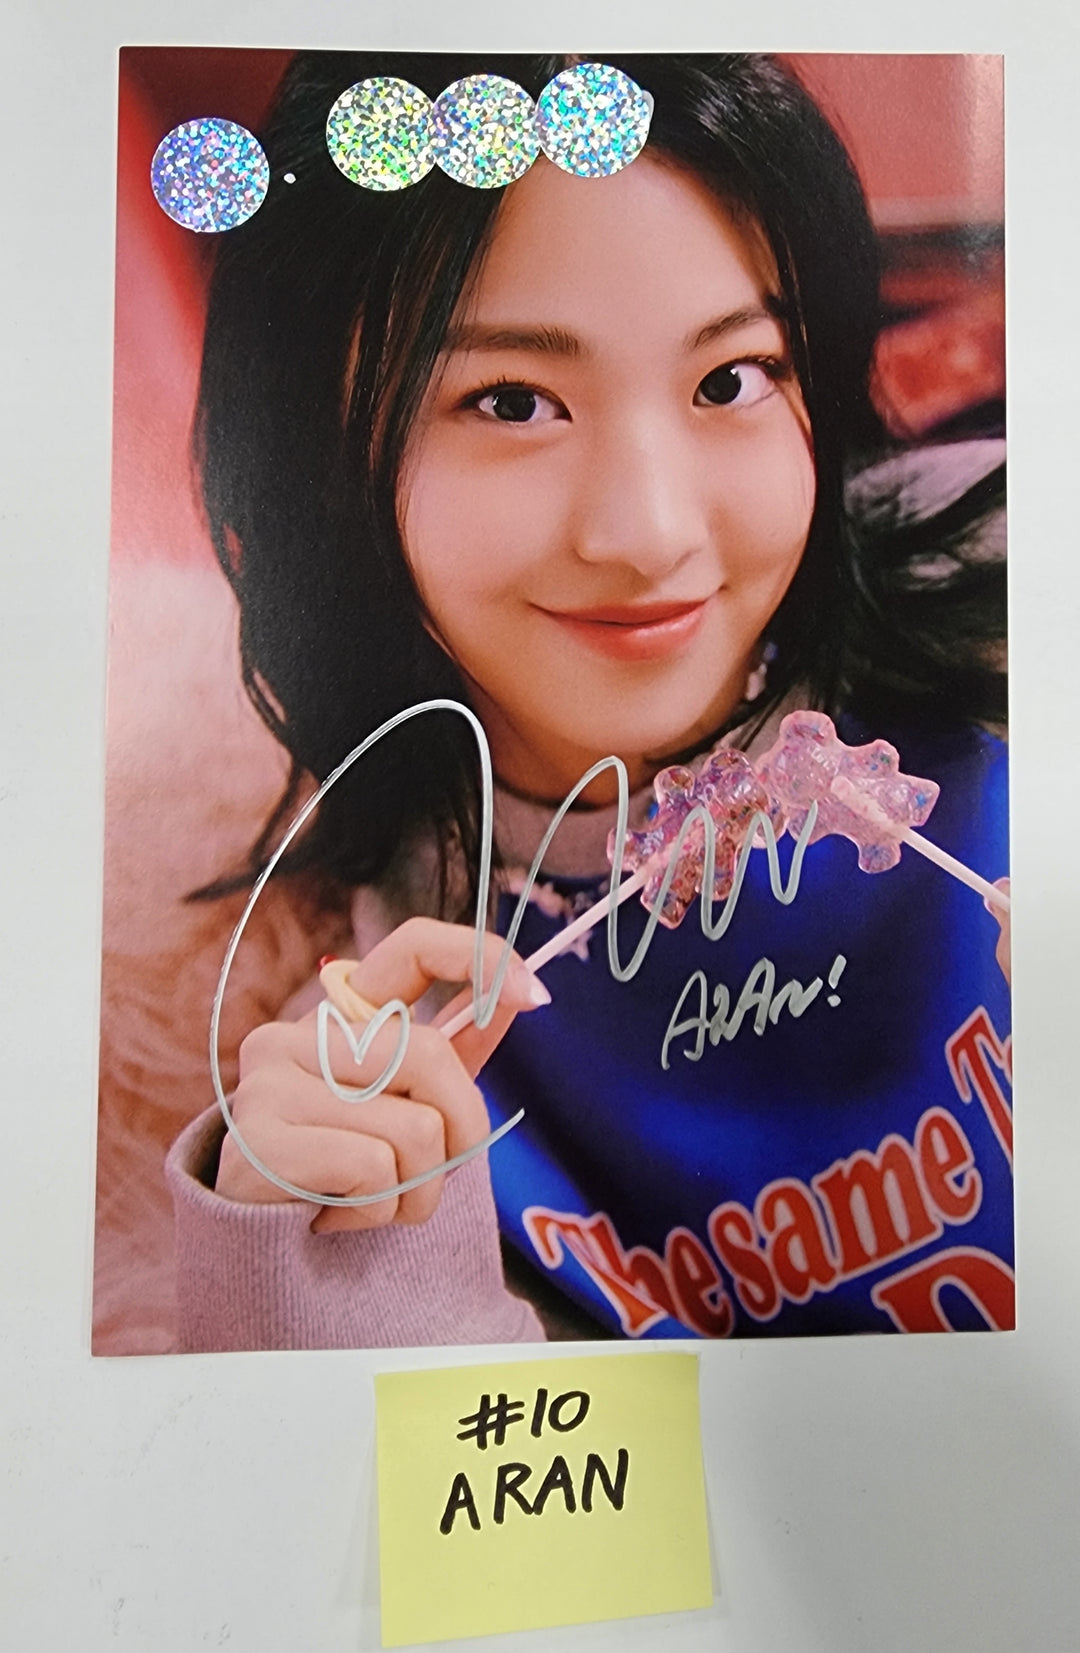 FIFTY FIFTY "The Beginning: Cupid" - A Cut Page From Fansign Event Album